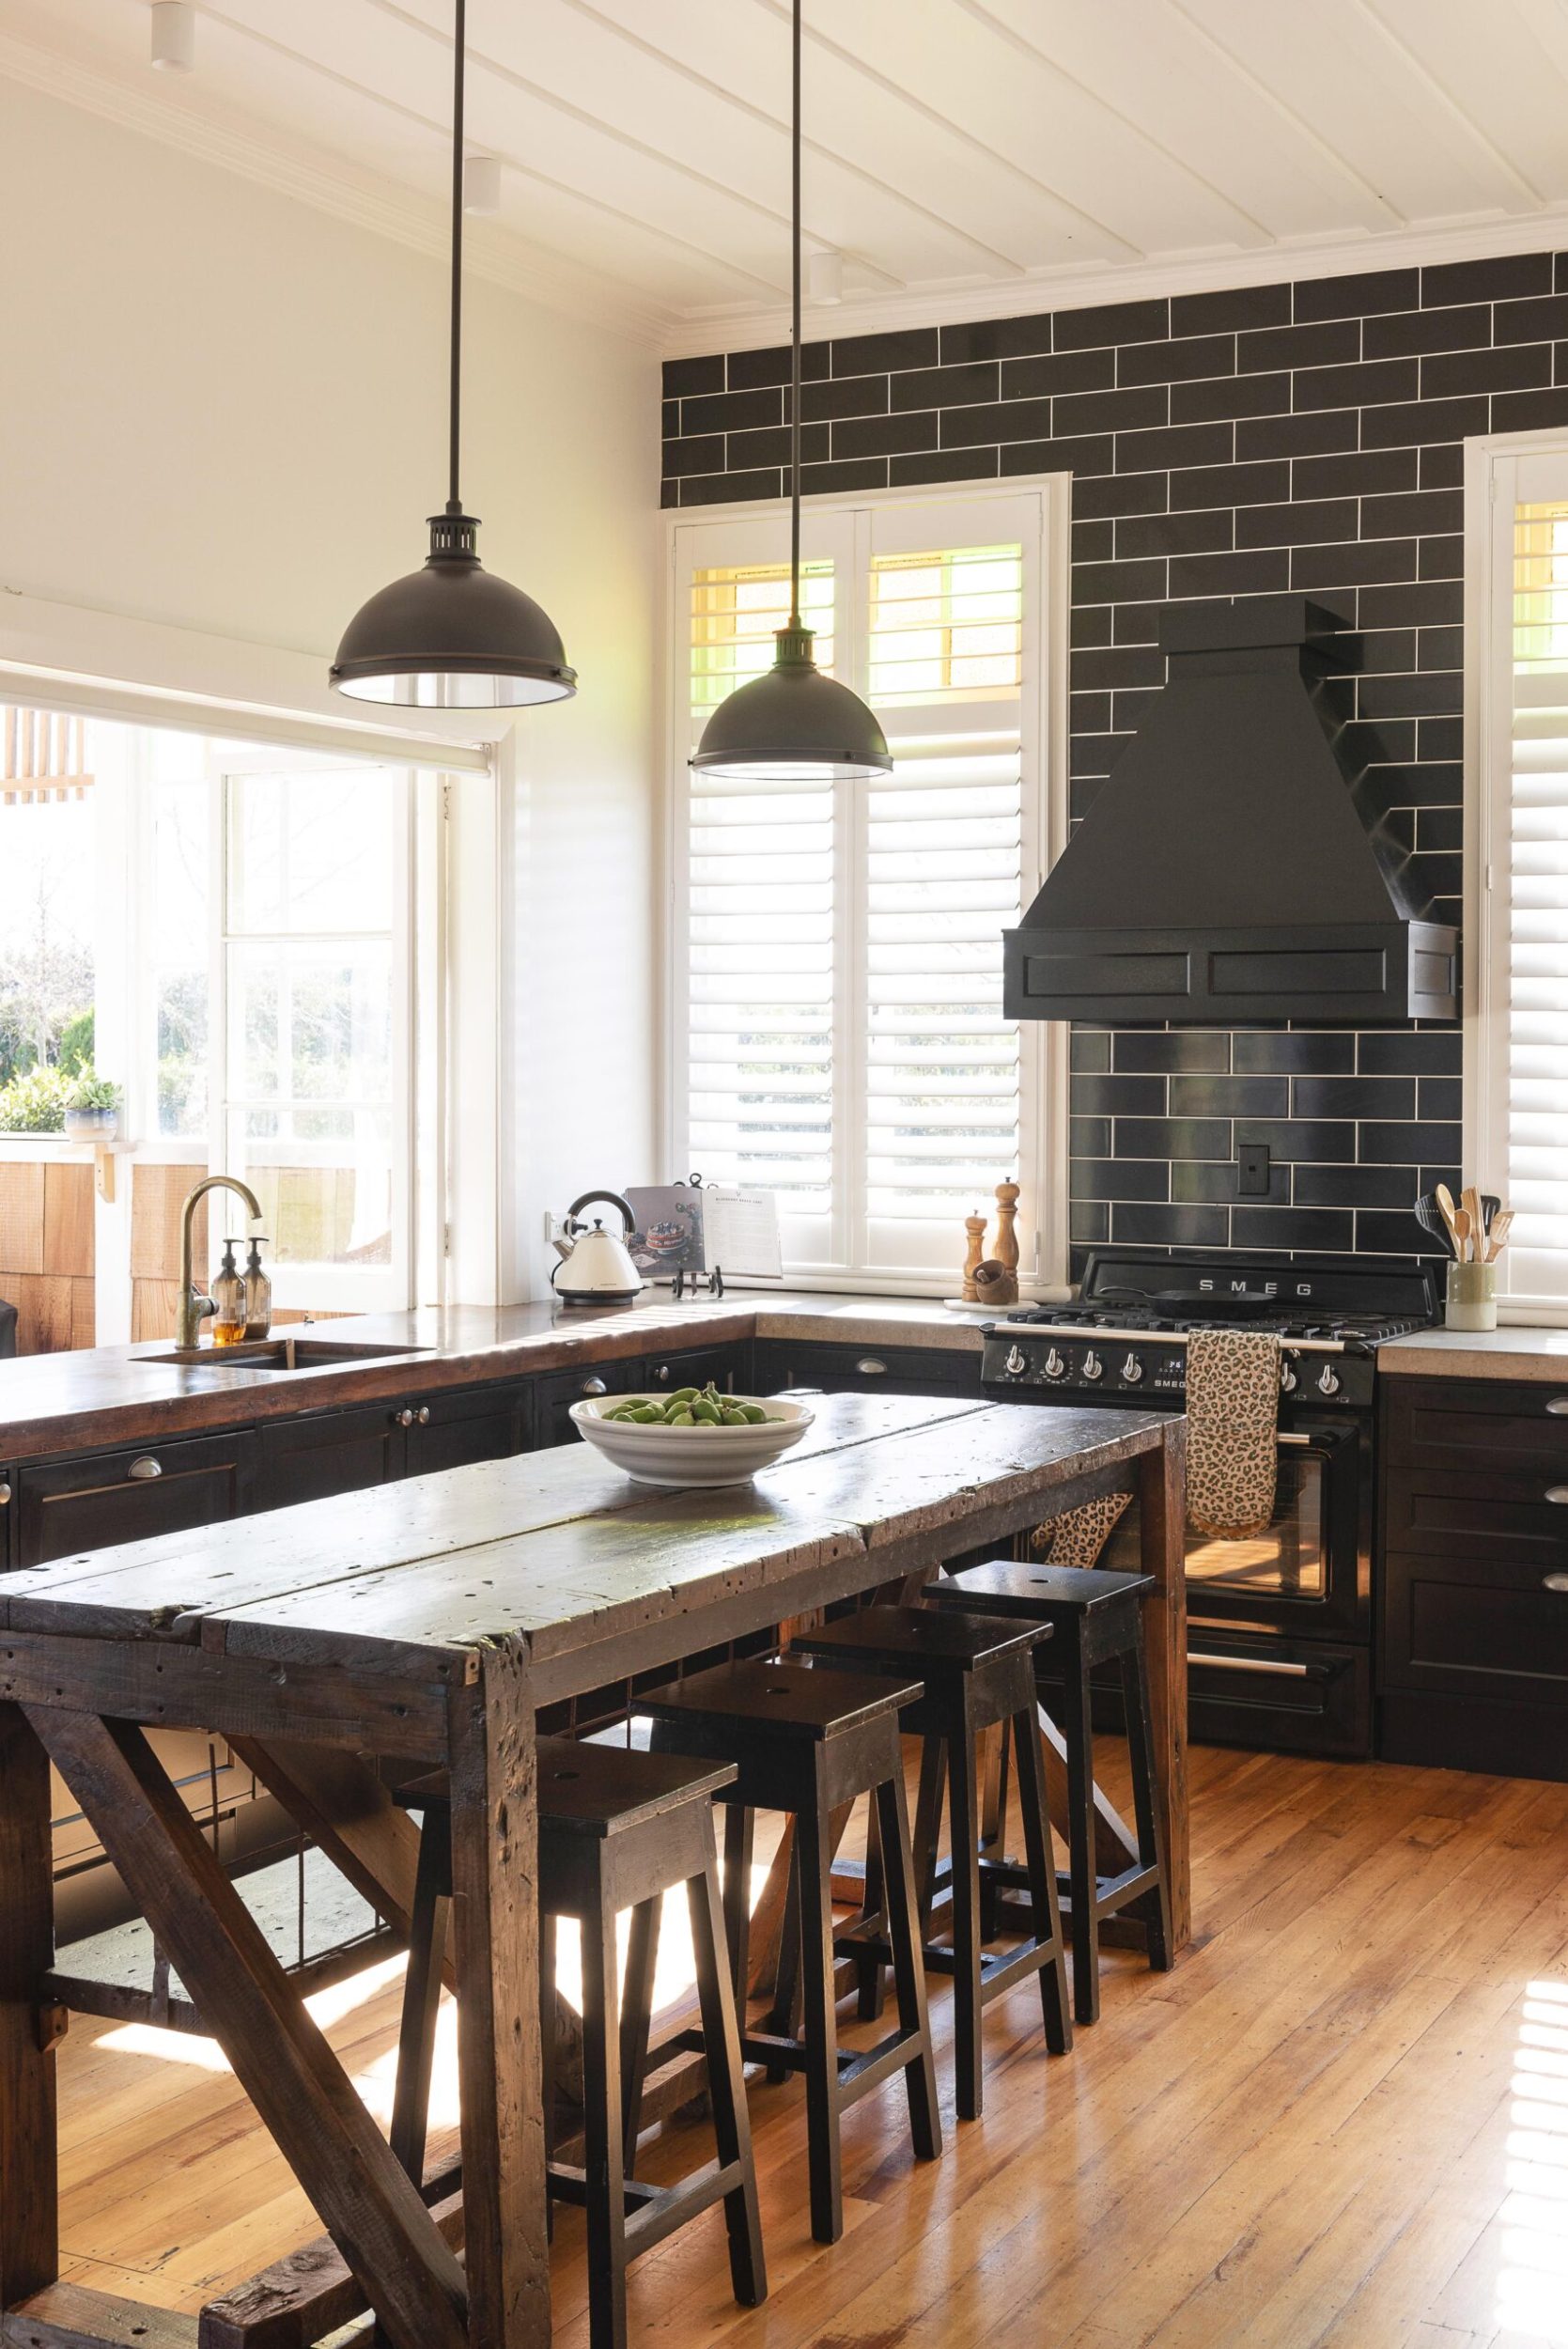 A kitchen with black subway tiles, polished wooden floors and a vintage dark wood island with stools